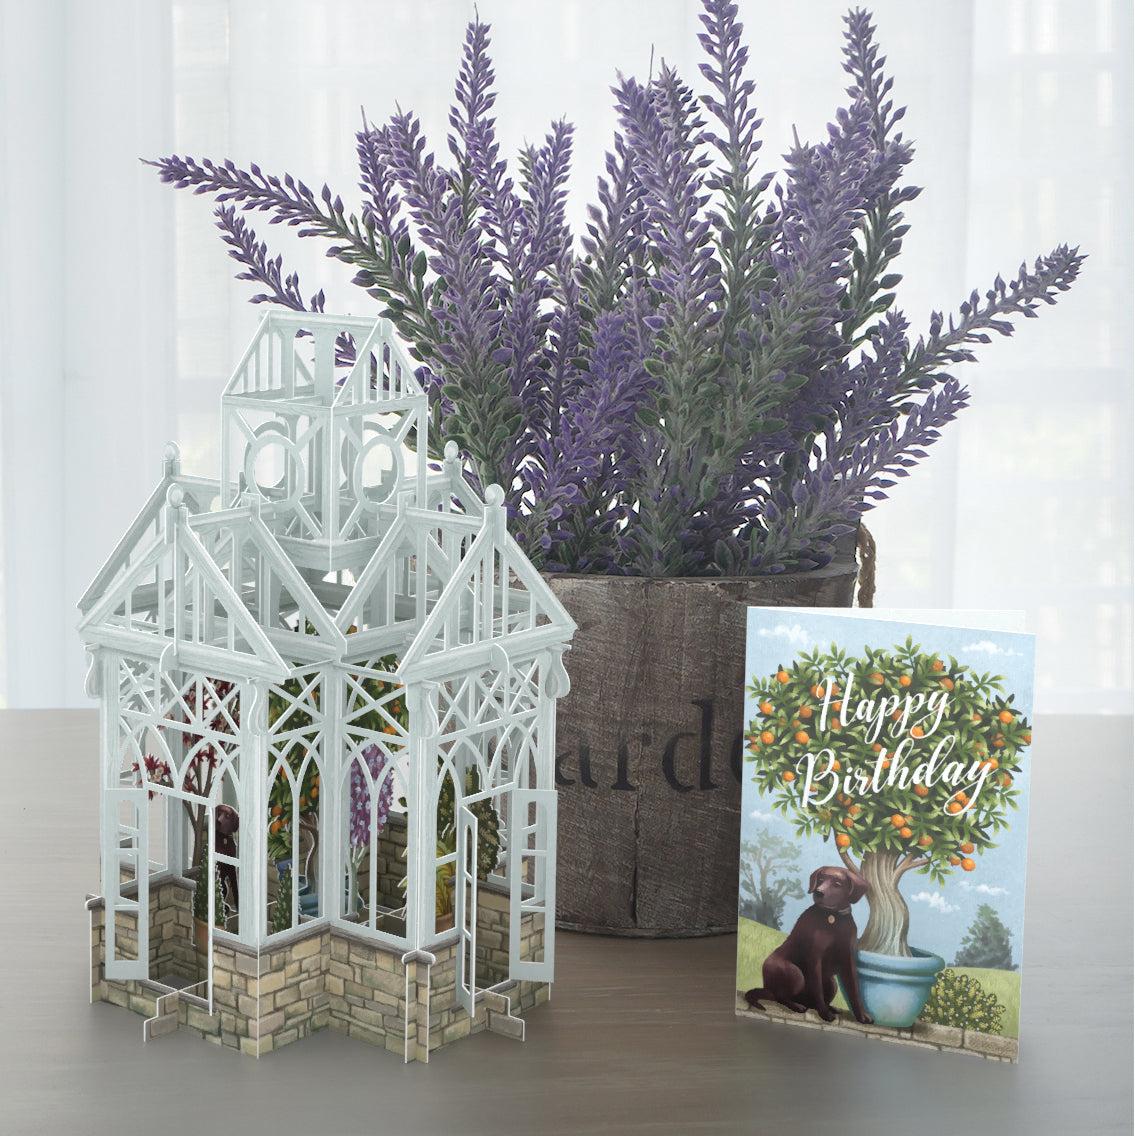 &quot;The Glass House&quot; - 3D Pop Up Greetings Card